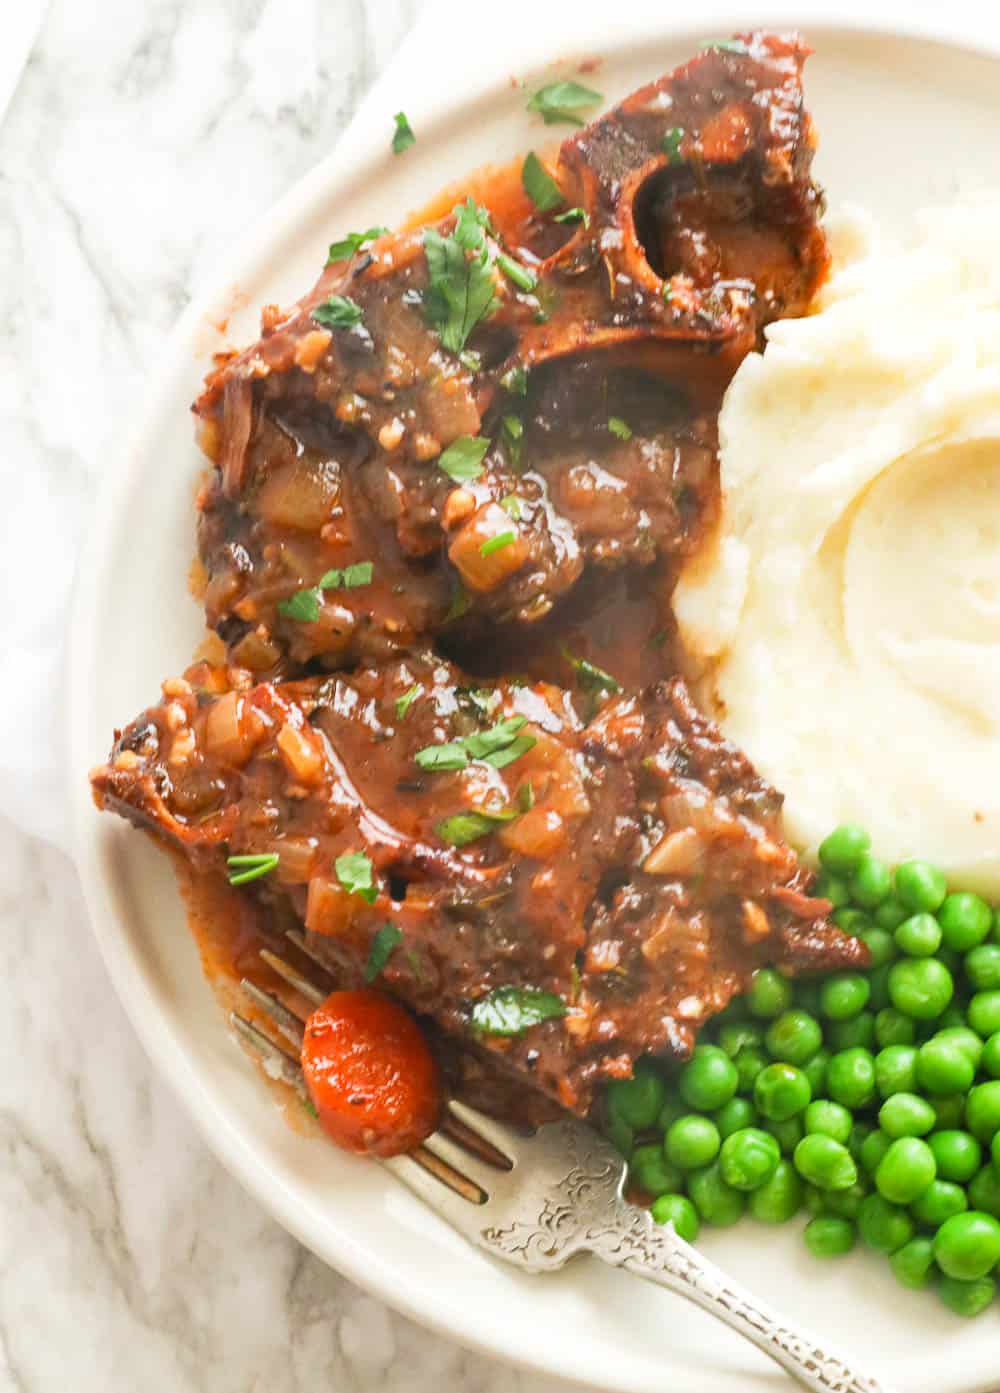 Braised Beef Neck Bones Served with Mashed Potatoes and Green Peas